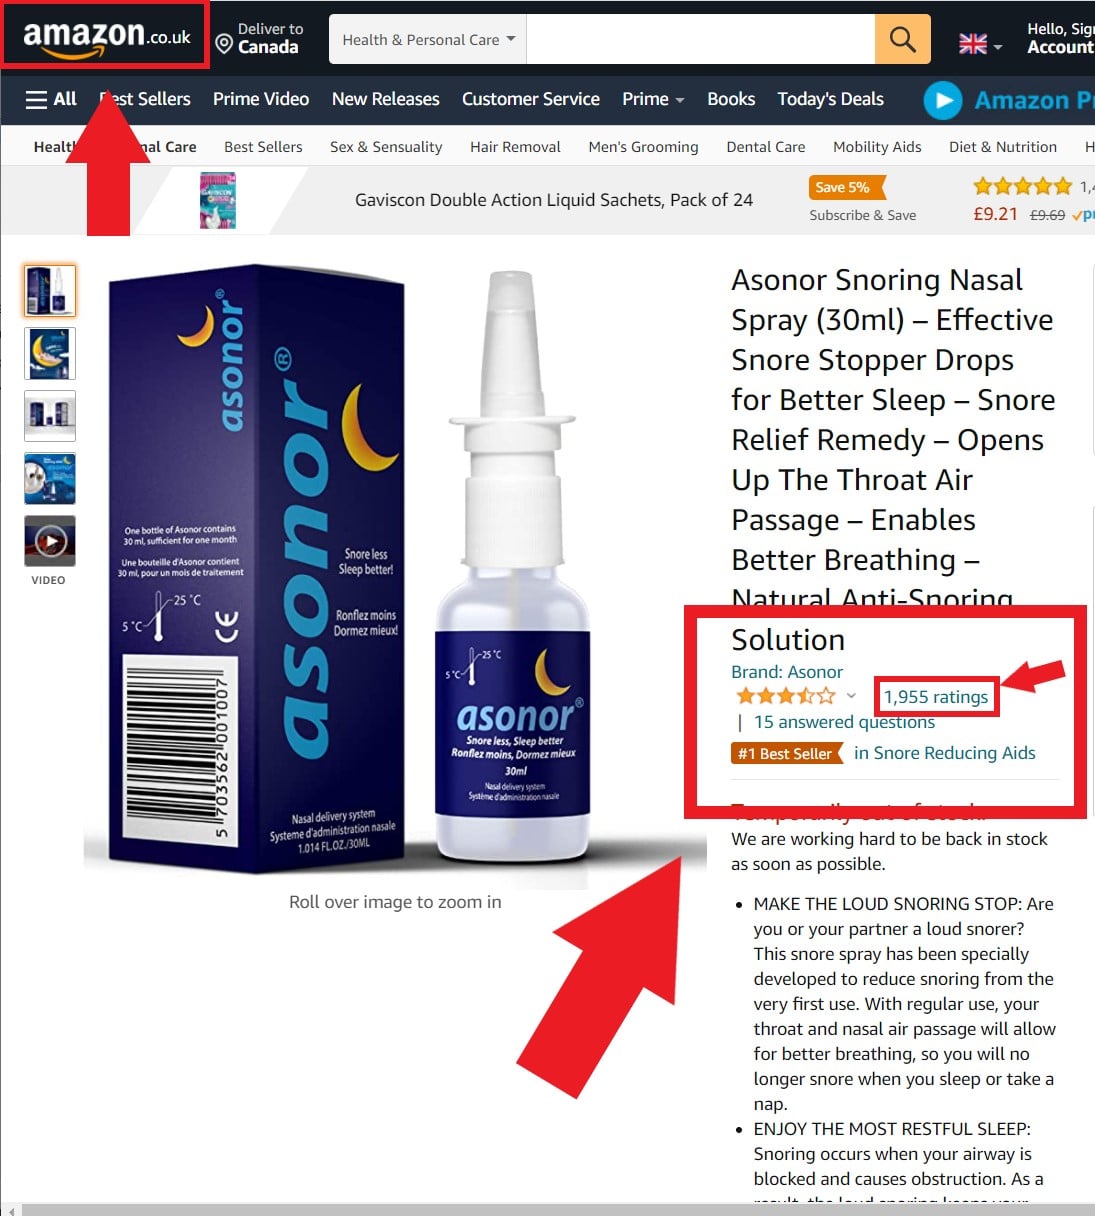 Asonor rate in Amazon